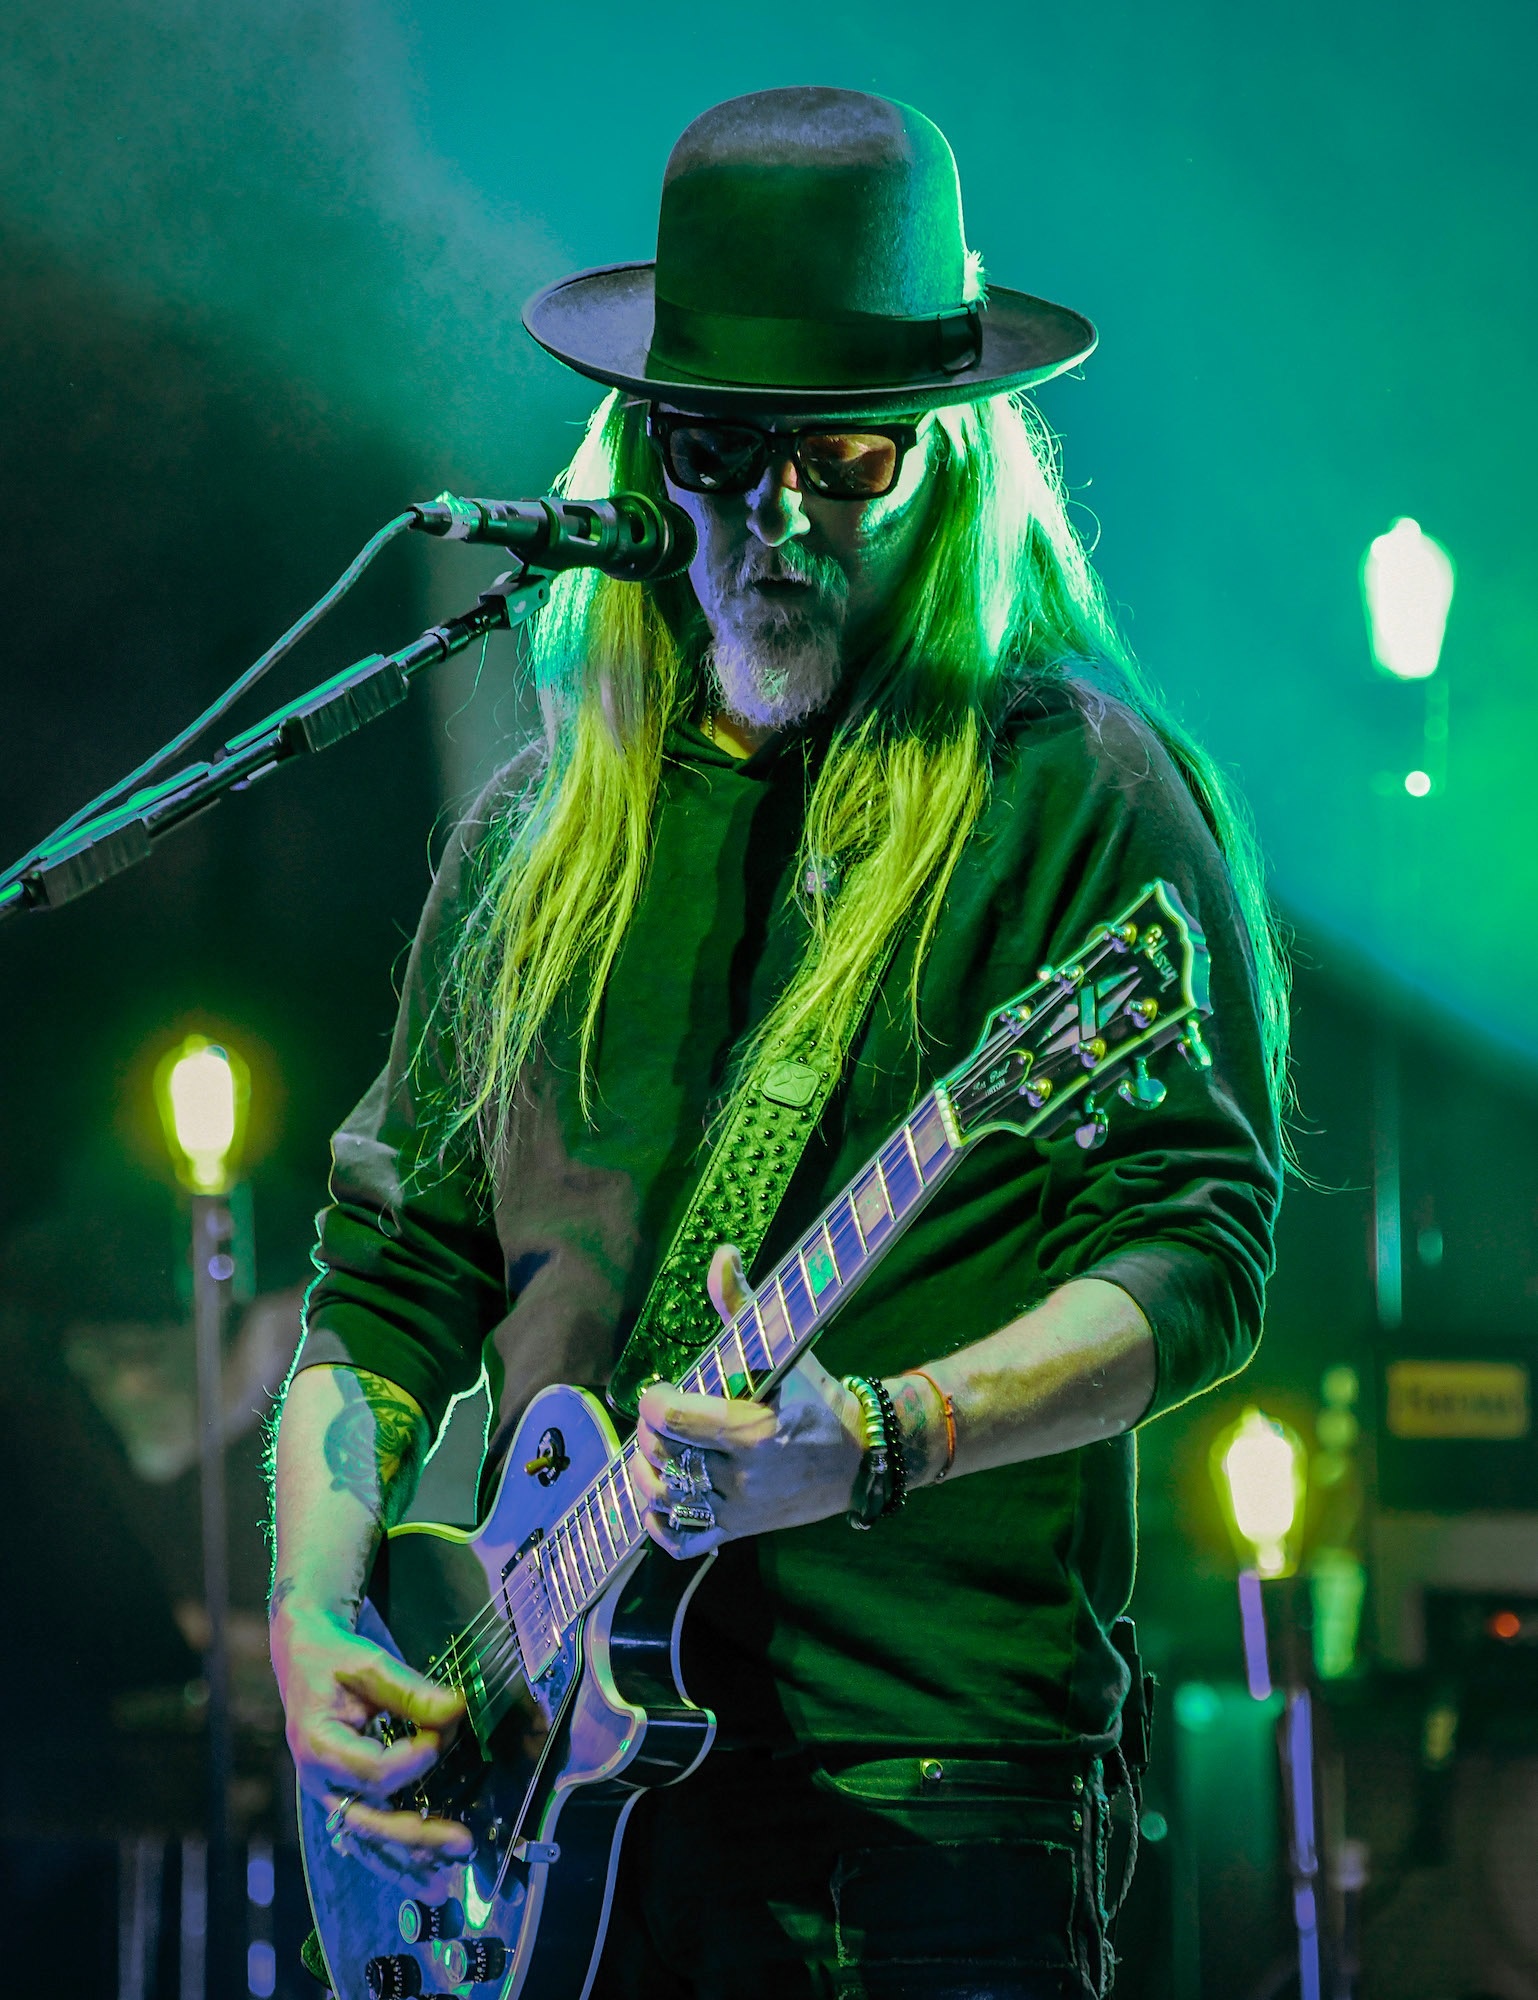 HD wallpaper, Mobile Hd Jerry Cantrell Wallpaper Image, Jerry Cantrell Live At The Vic Theatre Gallery   Chicago Music Guide 1540X2000